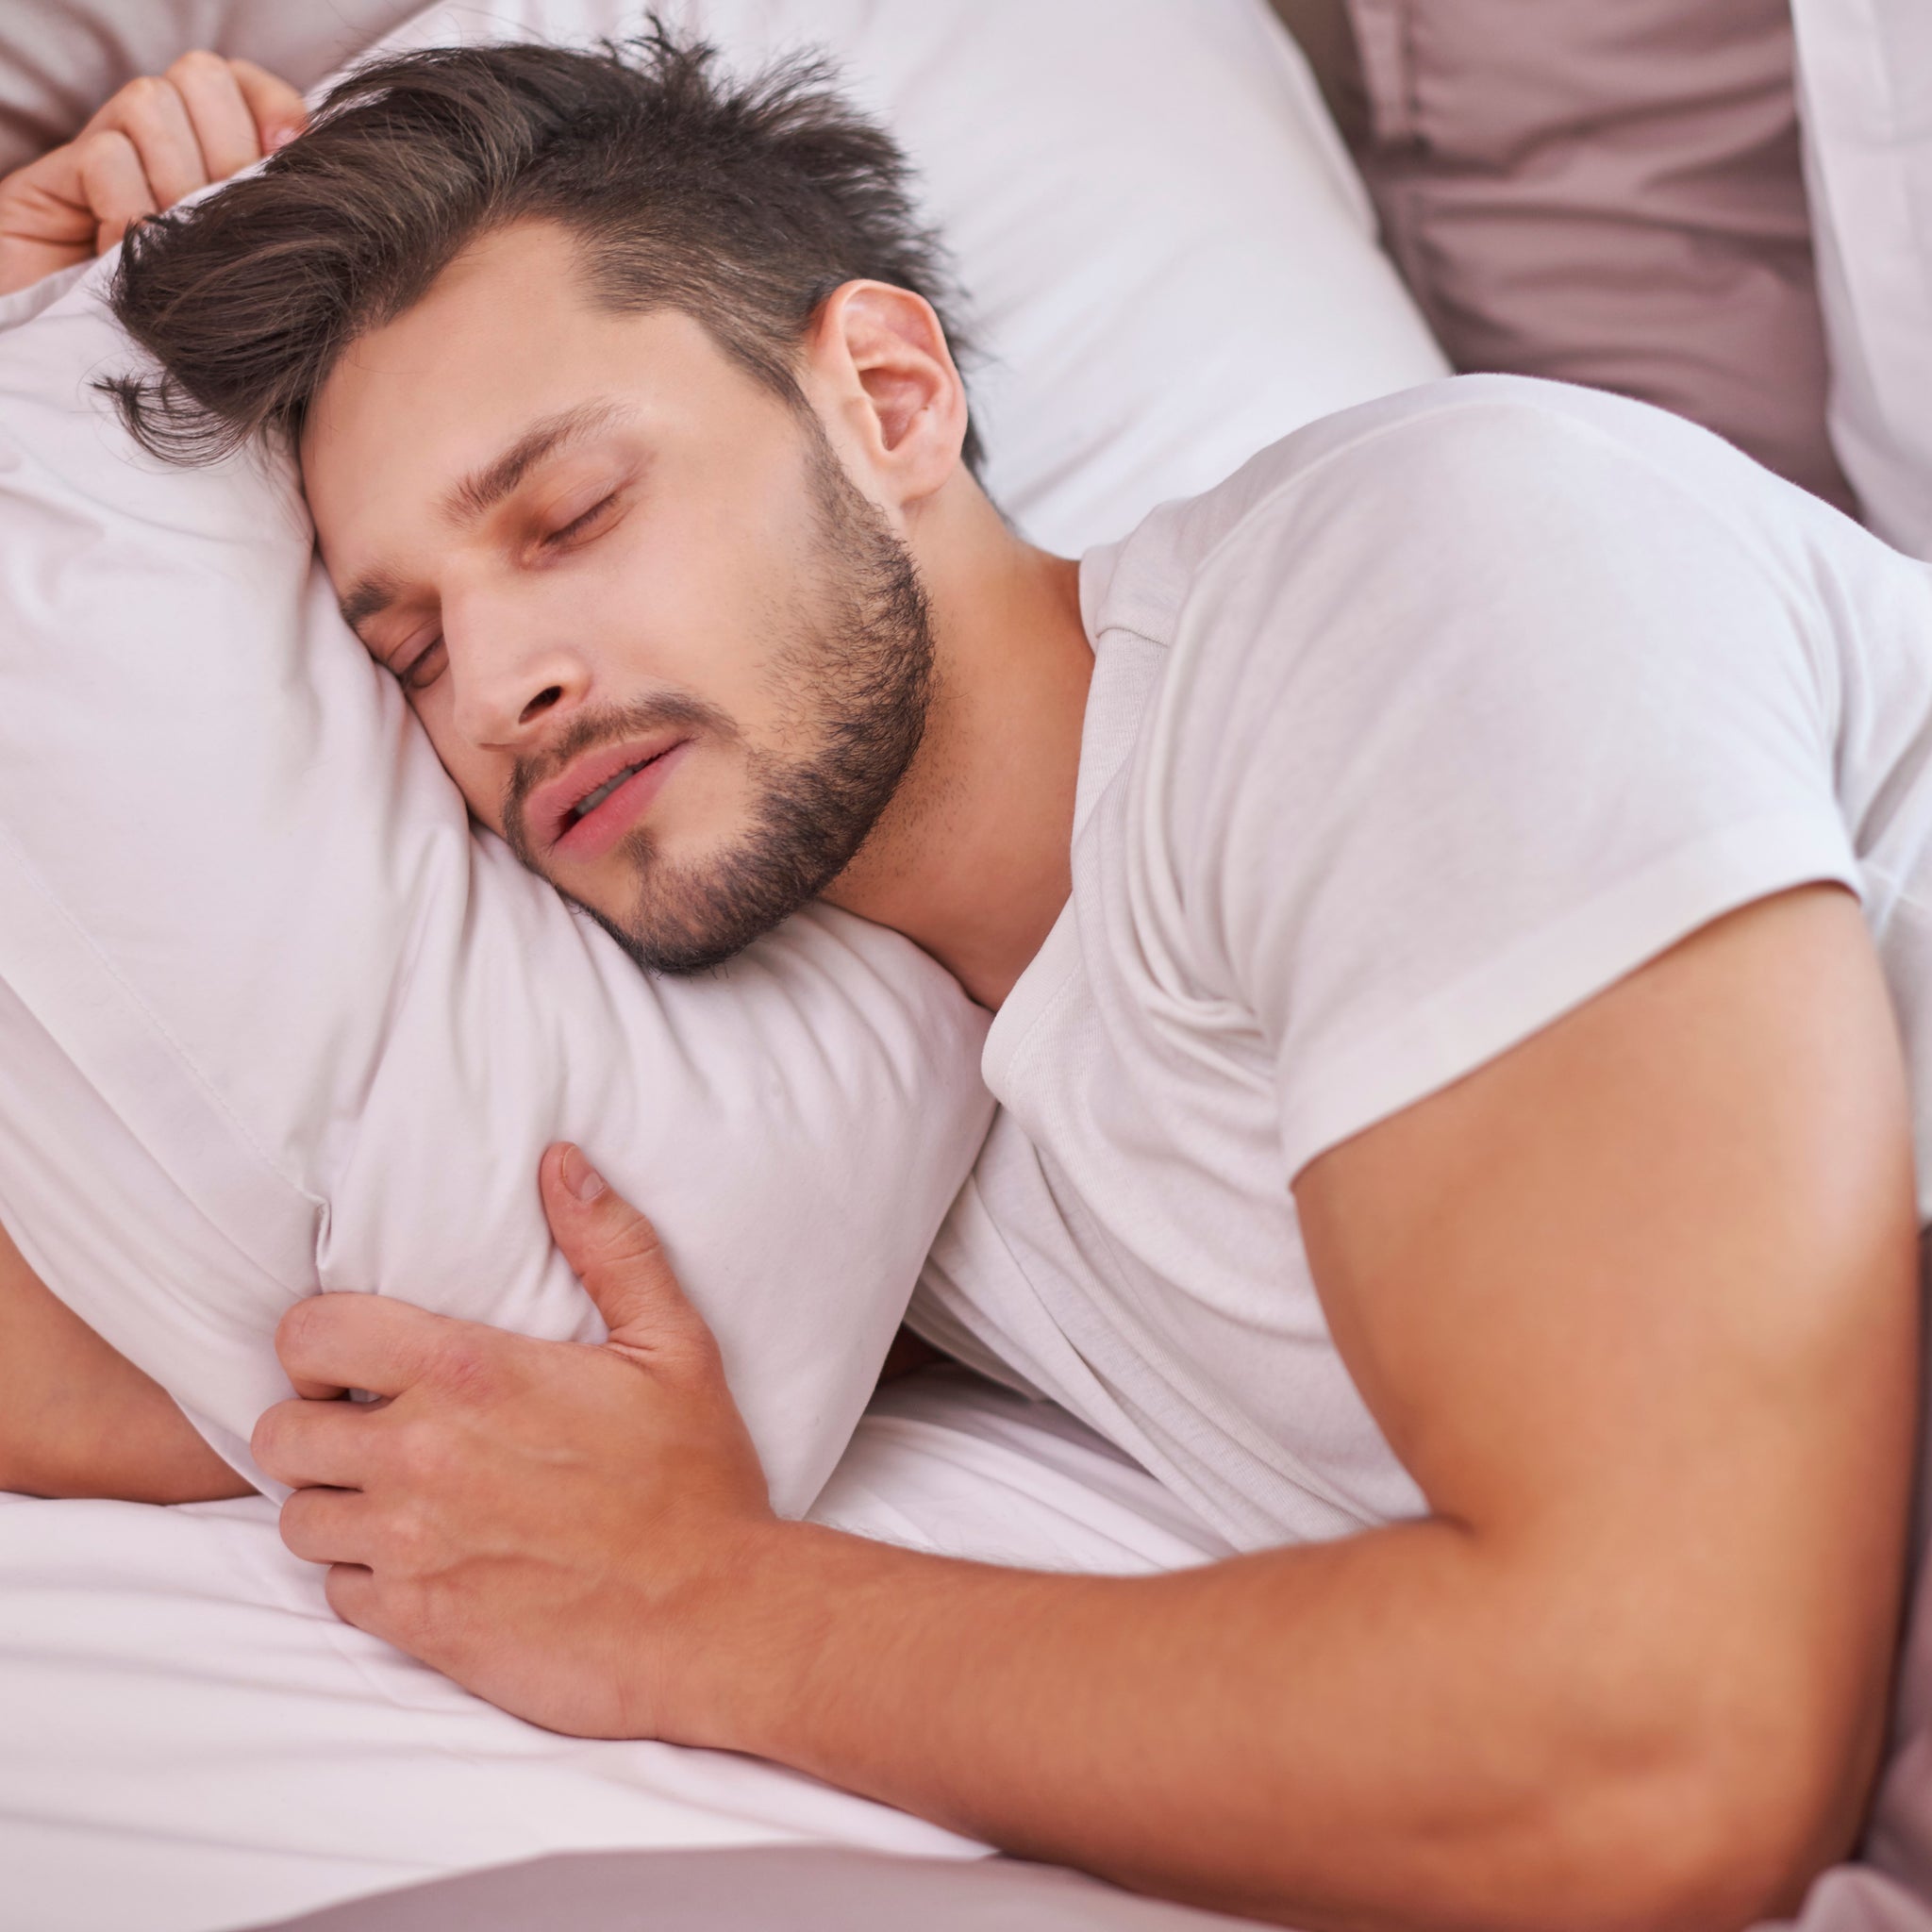 Anti-Snoring Device – The best solution for snore-free nights